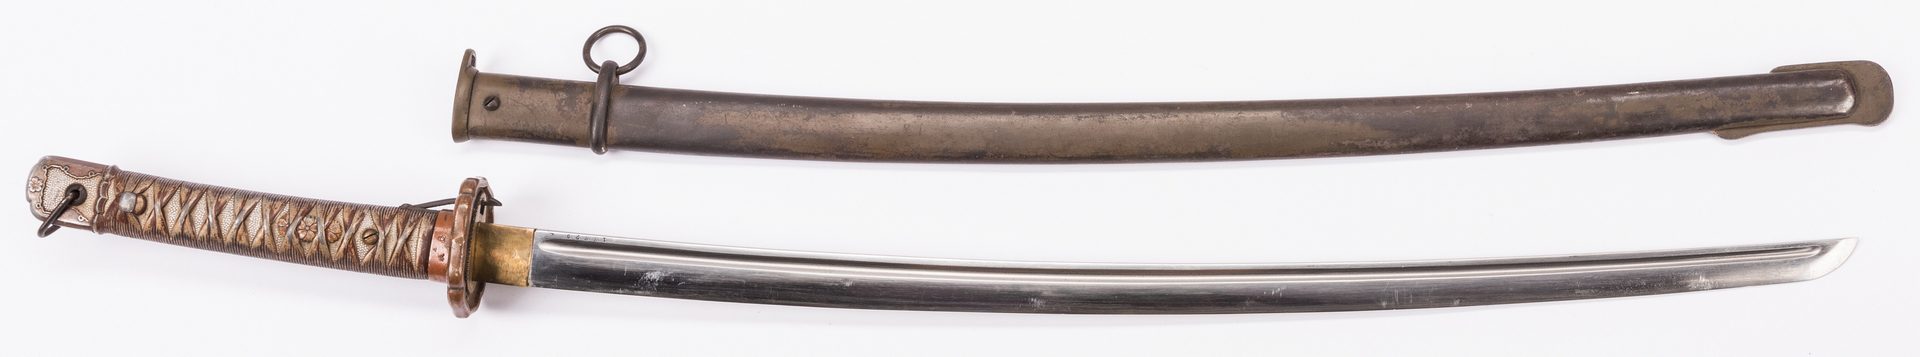 Lot 801: Japanese Type 95 NCO Sword & Welterbach Knife, 2 items